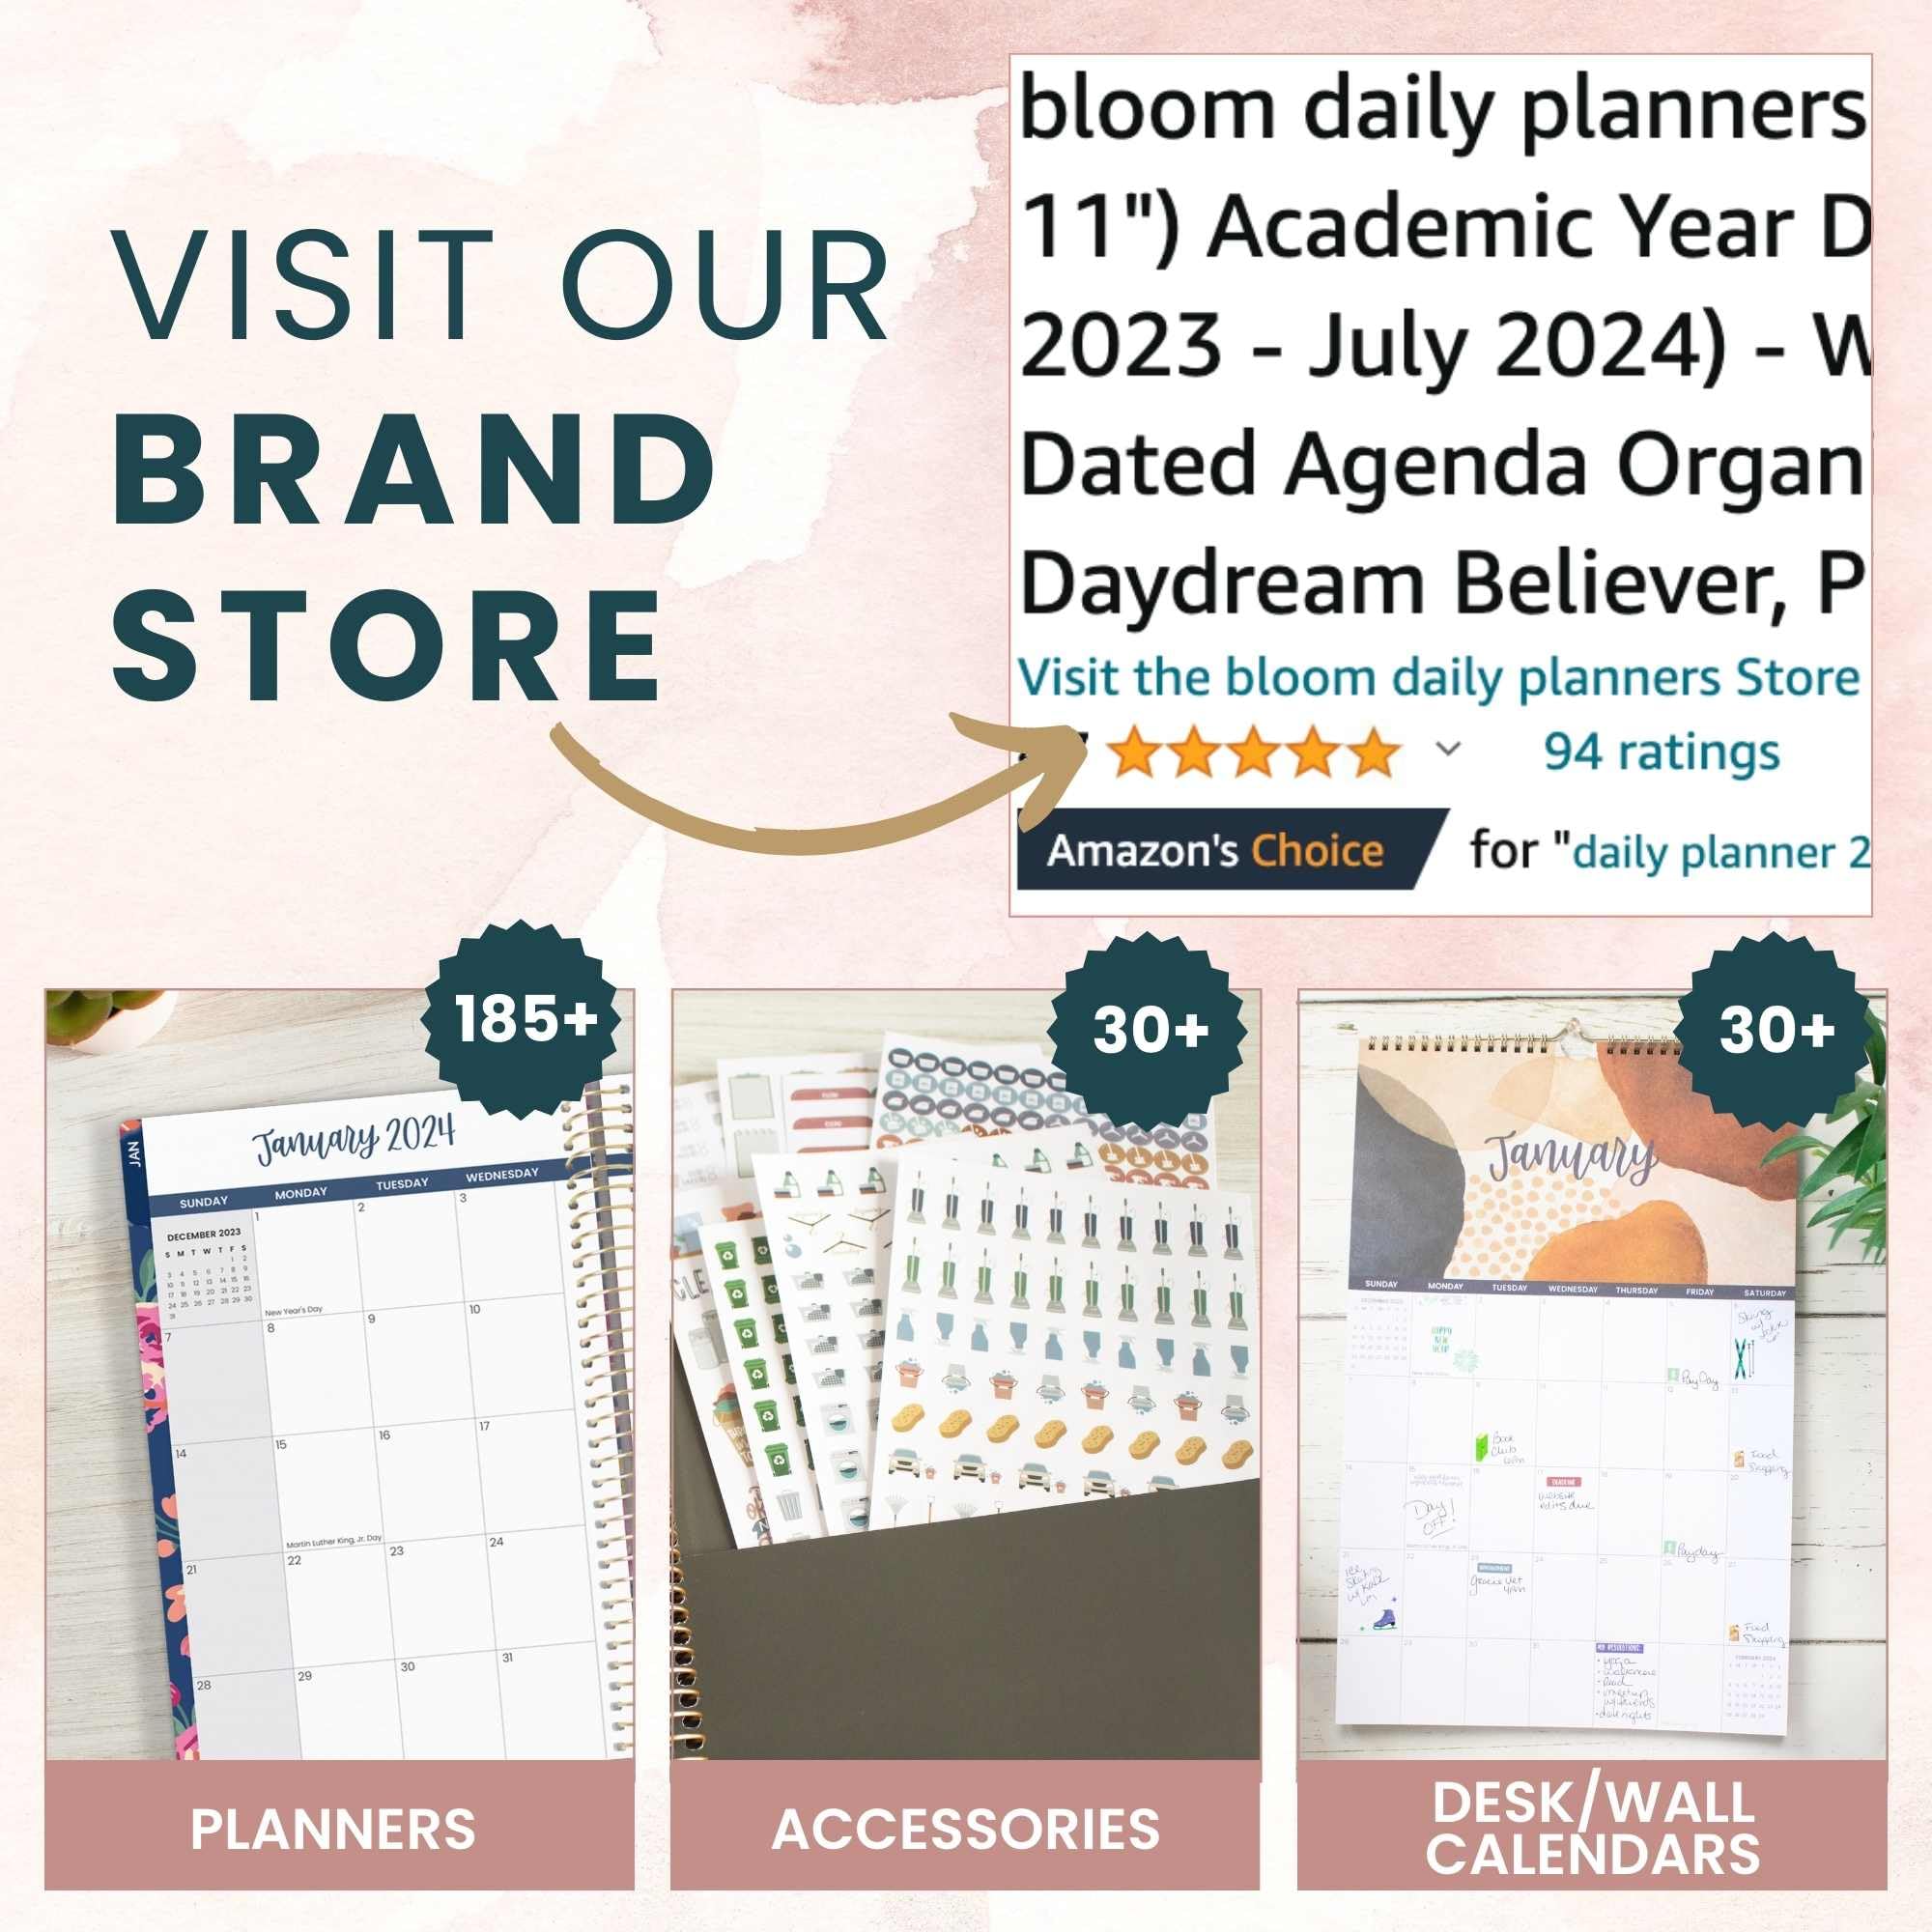 bloom daily planners New UNDATED Hardcover Calendar & Daily Bound To Do List Spiral Notebook - Notes, Goals, to Do's Planning System - 8.25" x 6.5" - Daydream Believer